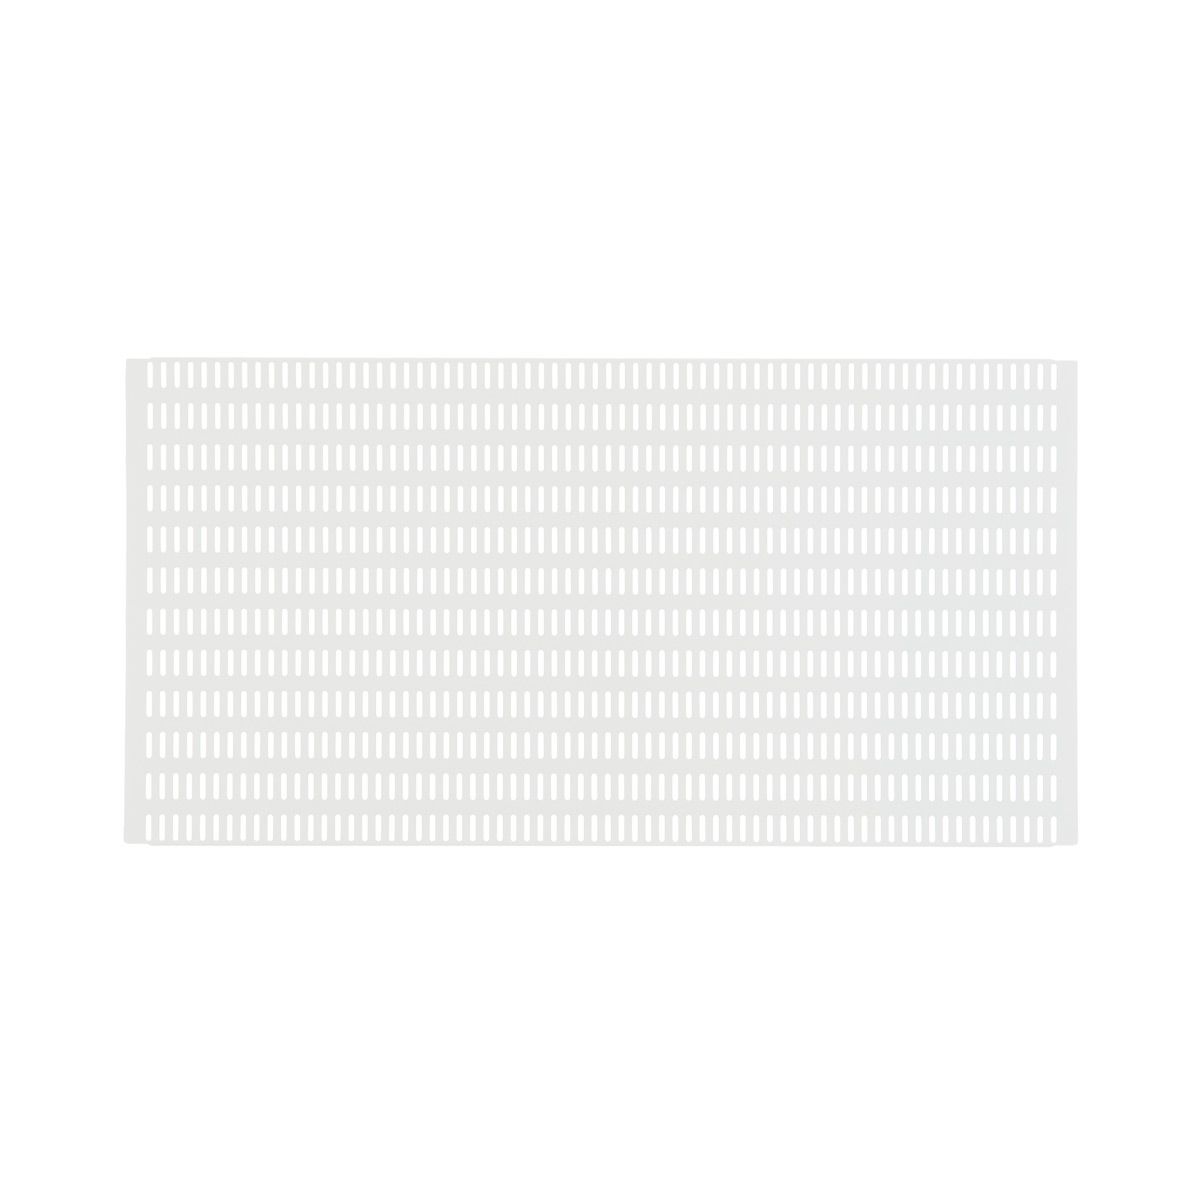 30" x 15" x 5/8" h Elfa Utility Board White | The Container Store